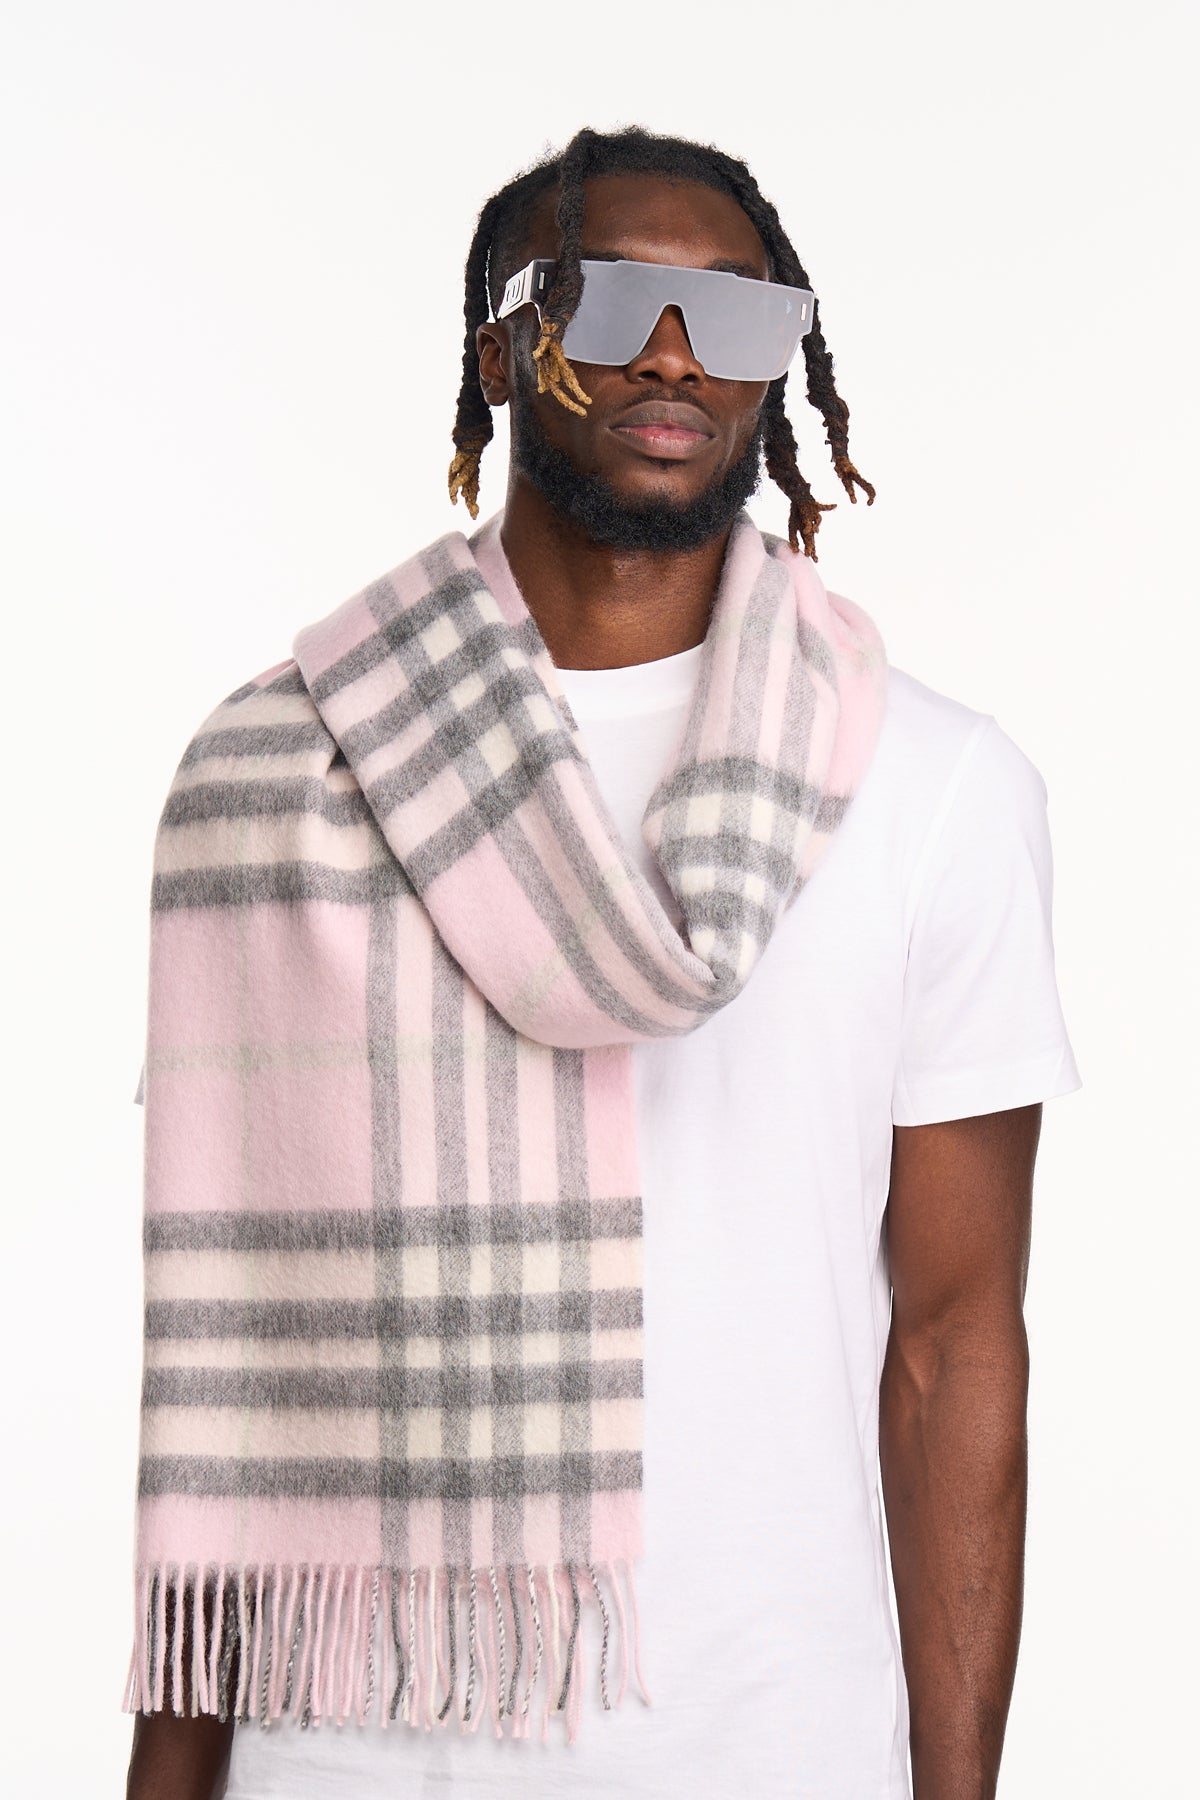 Scarf DC Classic Pink Oversized Wrap 100% Pure Lambswool